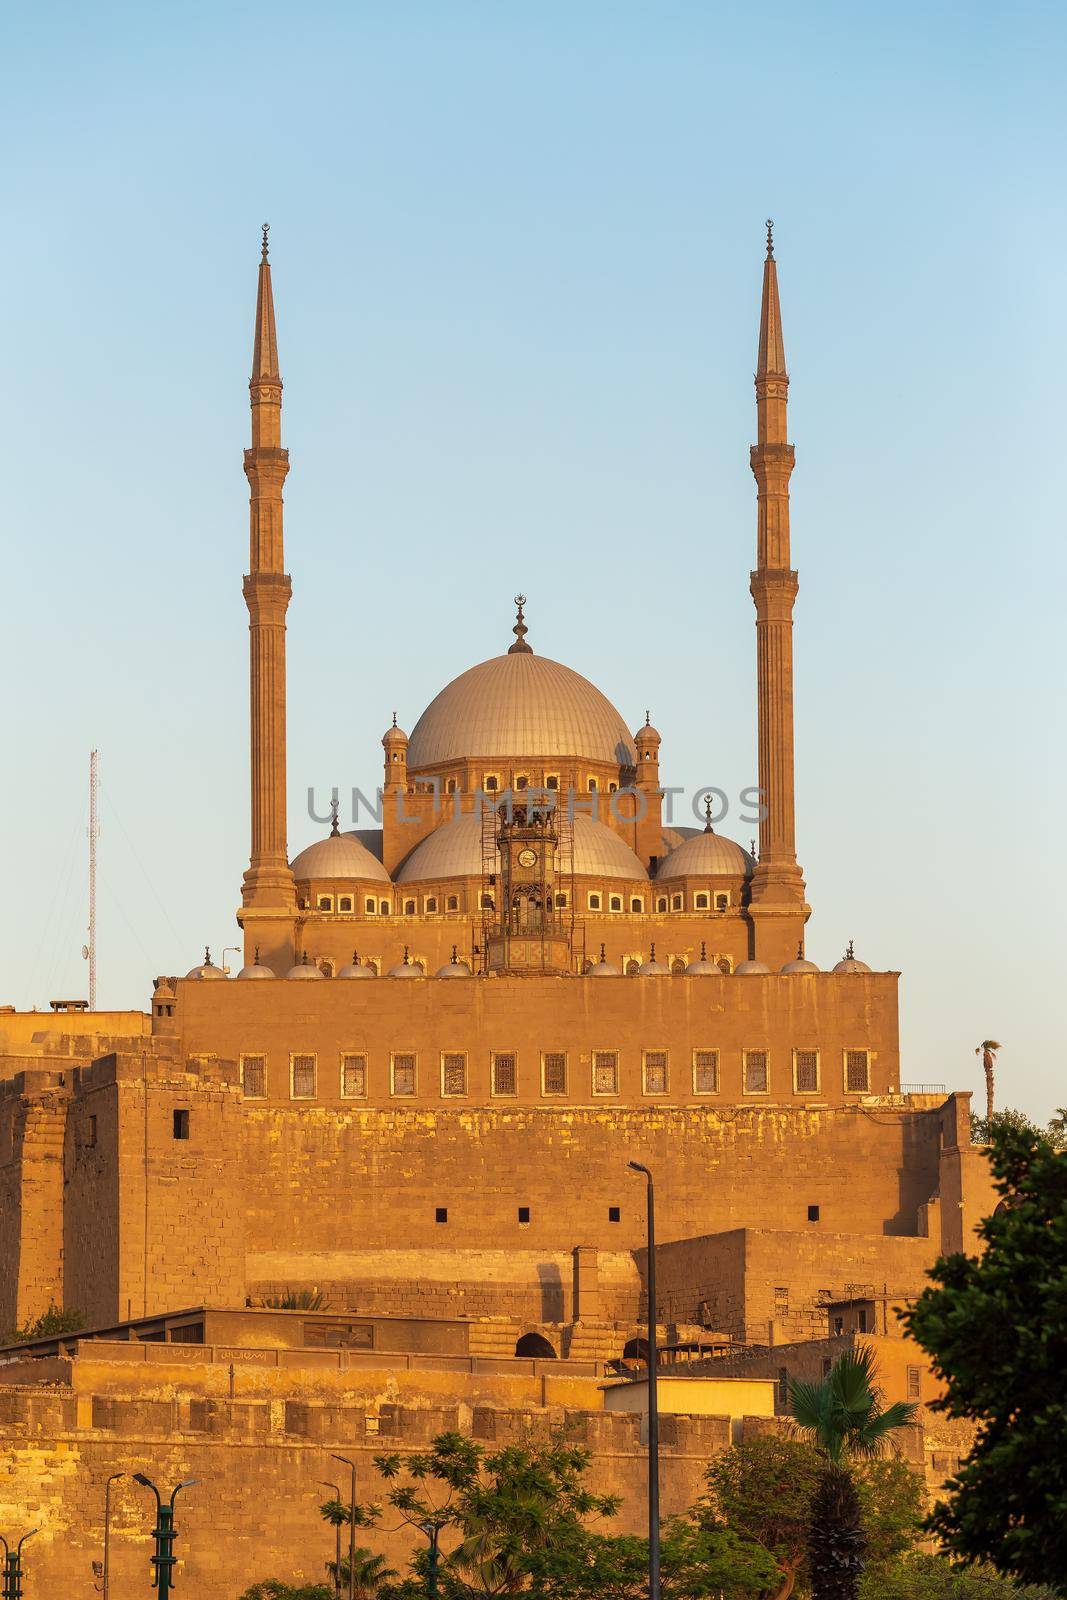 Muhammad Ali Pasha Alabaster Mosque of Saladin Citadel on Salah El-Deen square, Cairo, Egypt. Historic building in old town, Africa